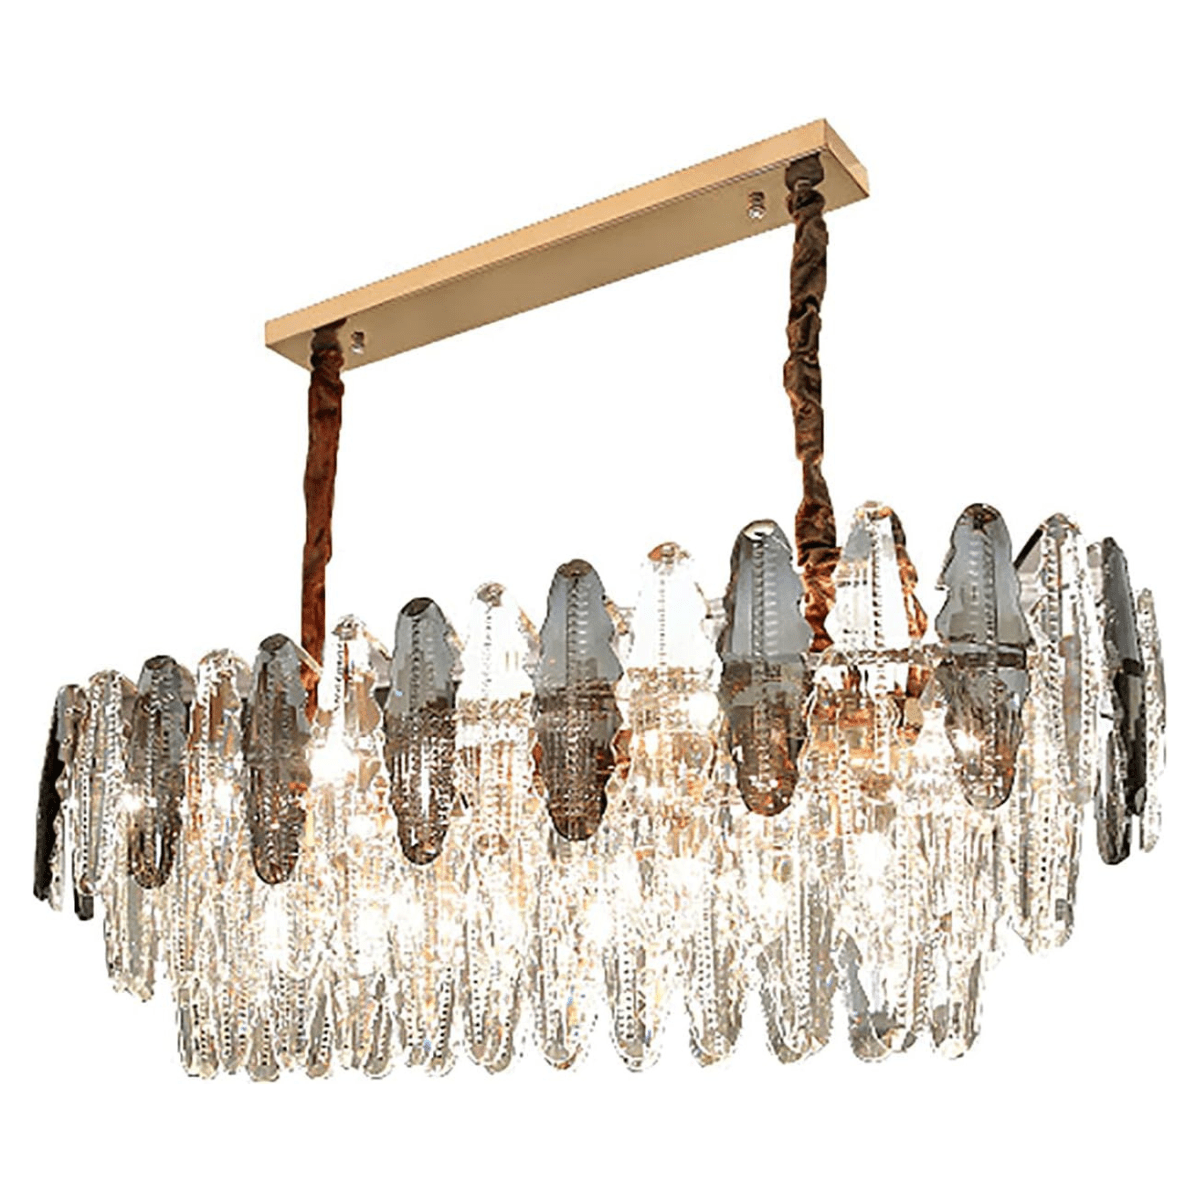 Buy Modern Oval LED Crystal Ceiling Pendant Chandelier 70cm - BH3016-OVAL | Shop at Supply Master Accra, Ghana Lamps & Lightings Buy Tools hardware Building materials